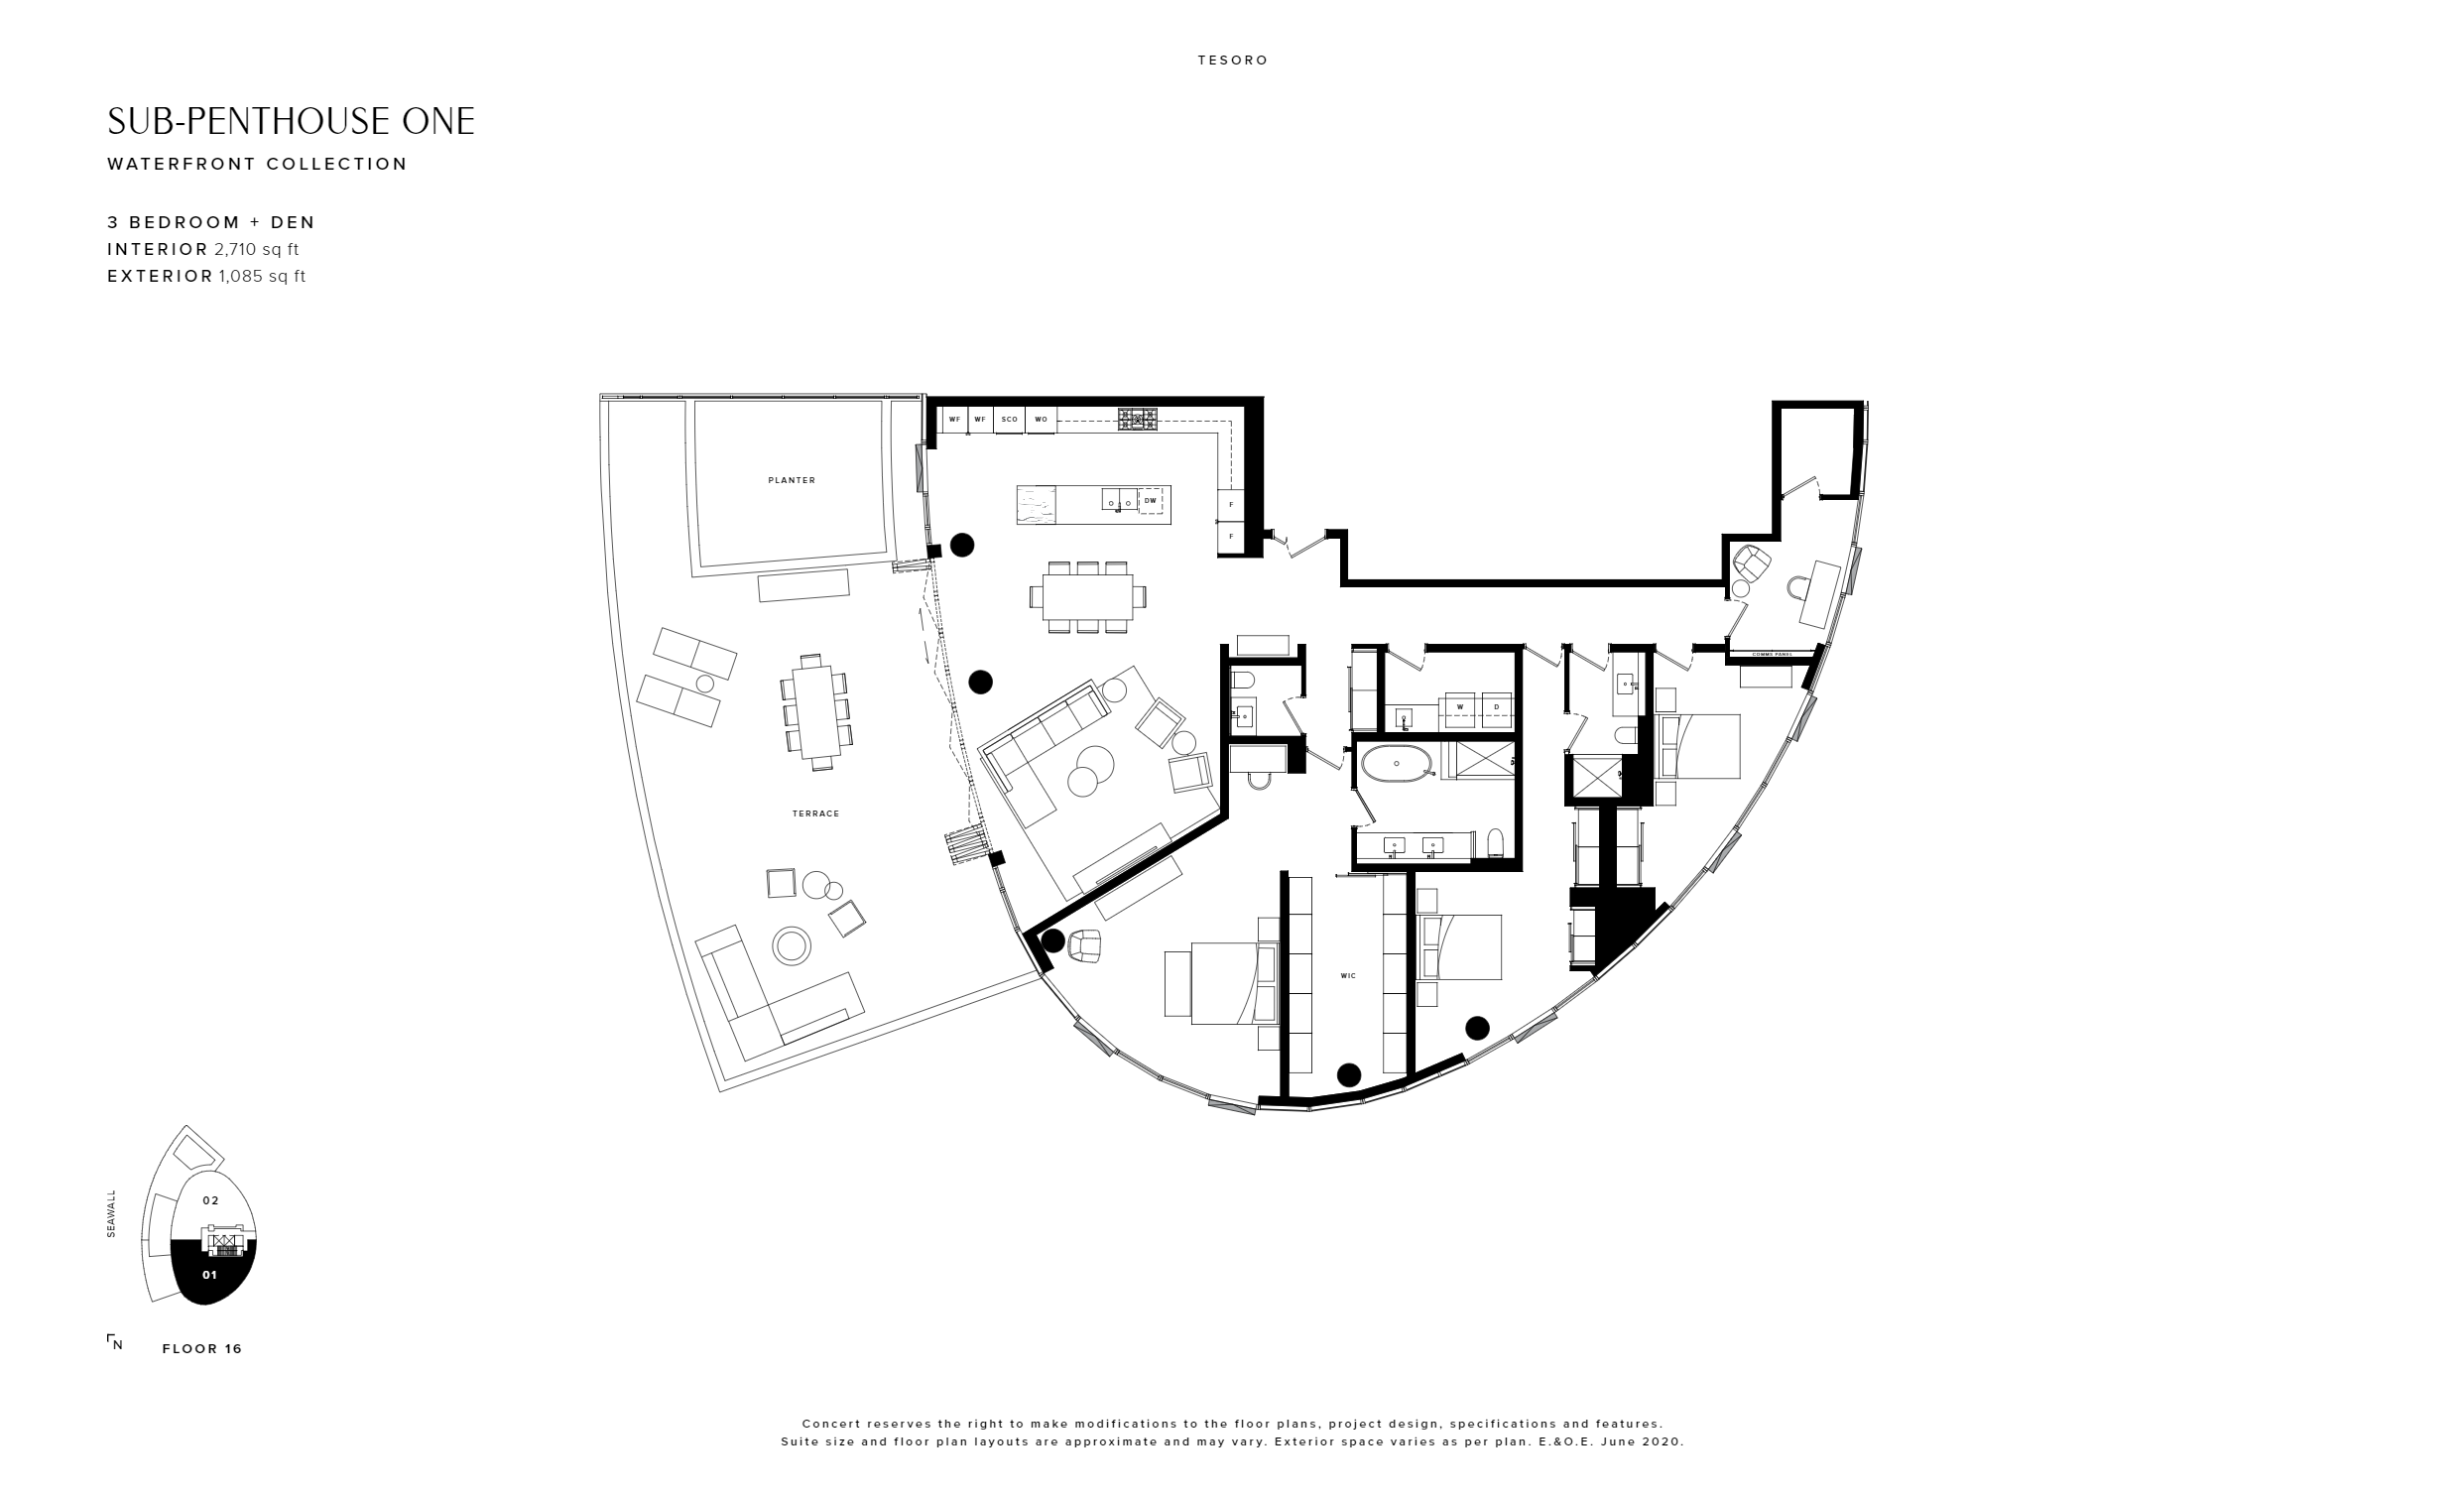 SUB-PENTHOUSE ONE Floor Plan of Tesoro Condos with undefined beds